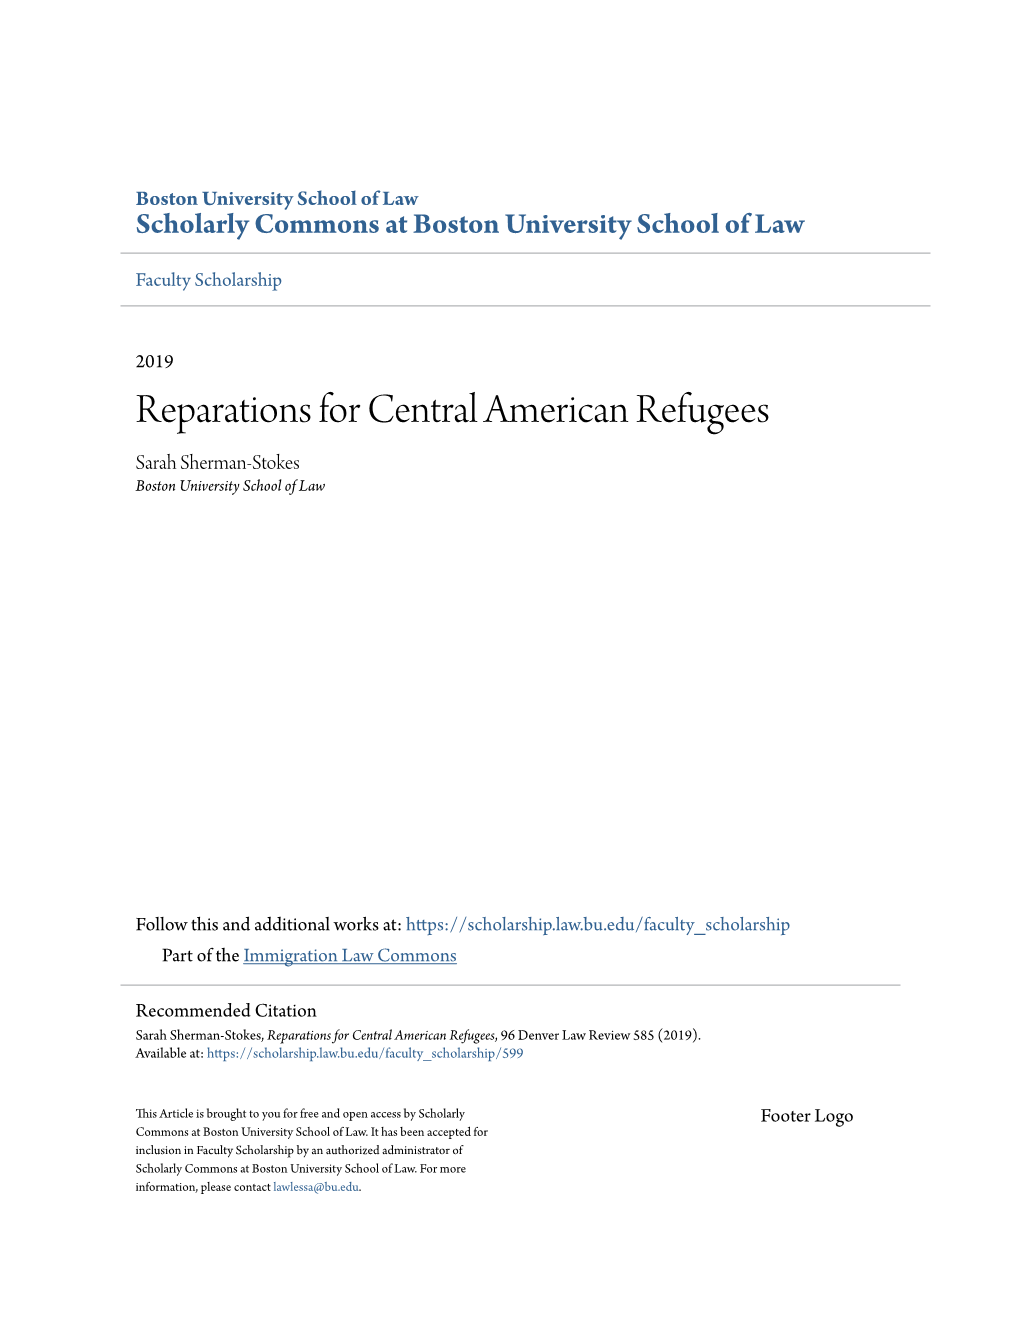 Reparations for Central American Refugees Sarah Sherman-Stokes Boston University School of Law